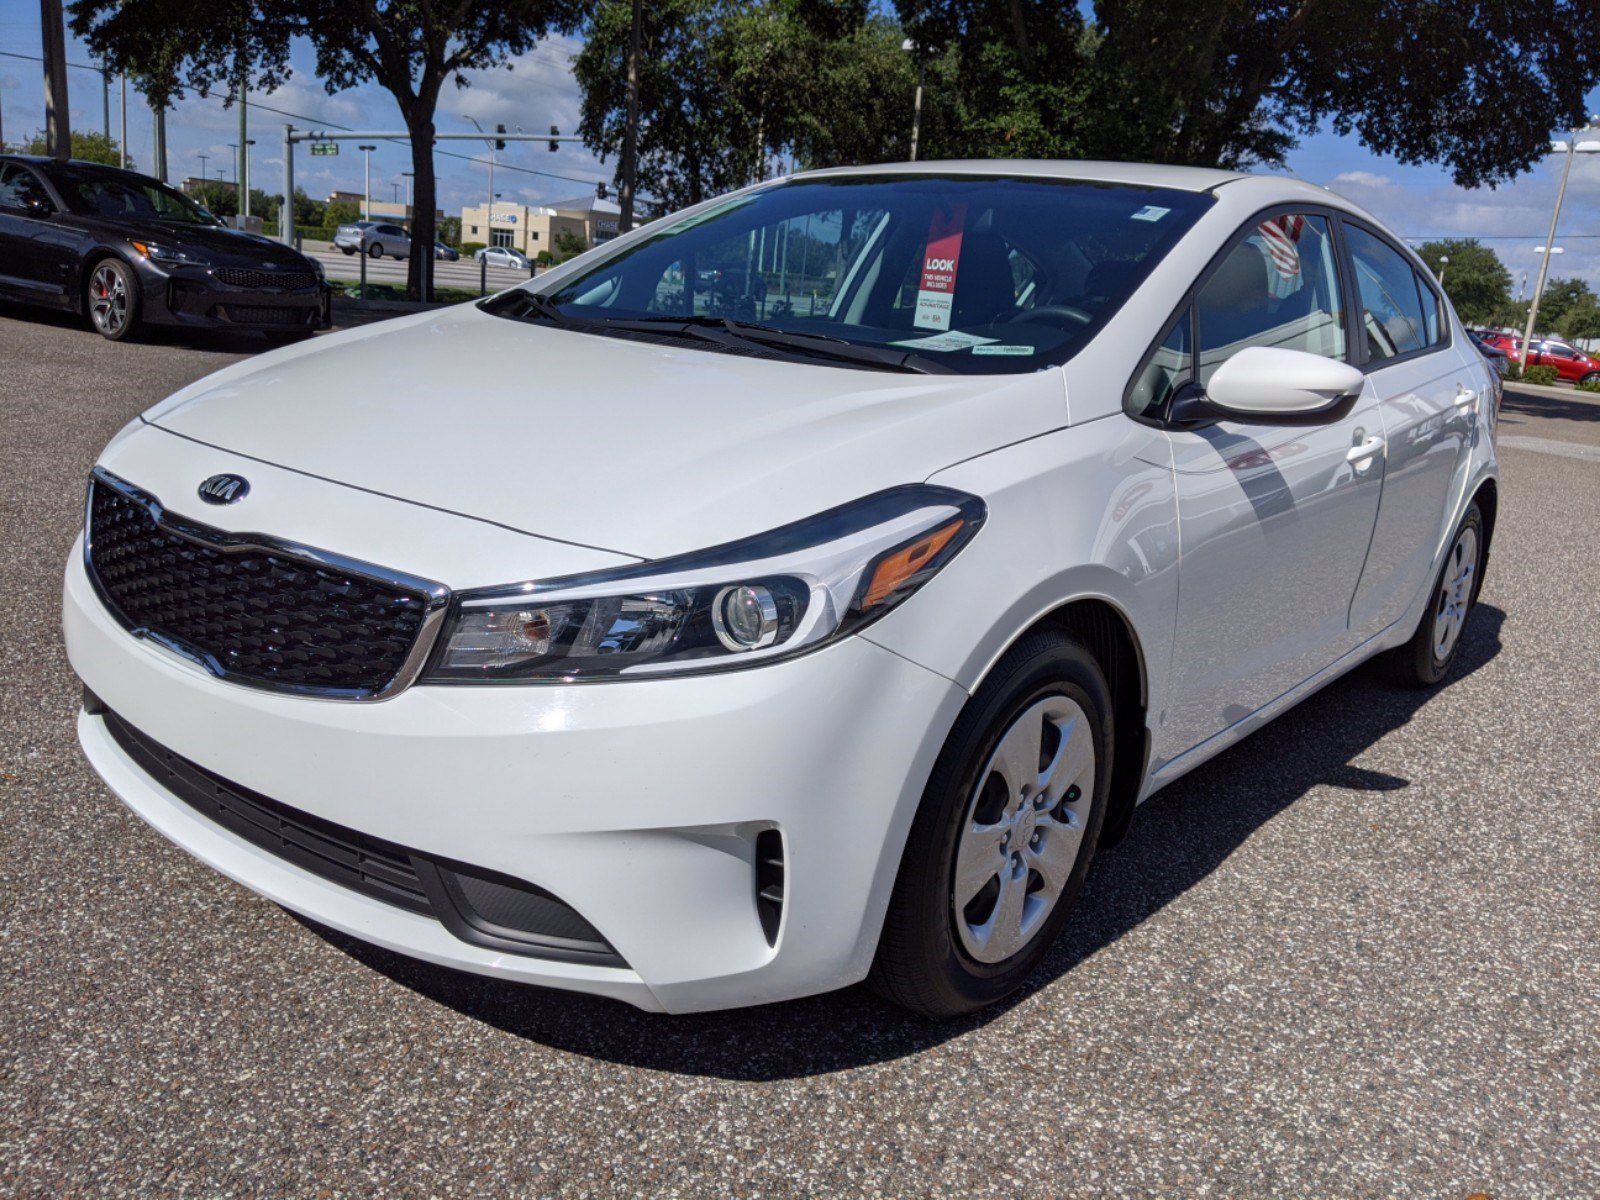 Certified PreOwned 2018 Kia Forte LX FWD 4dr Car